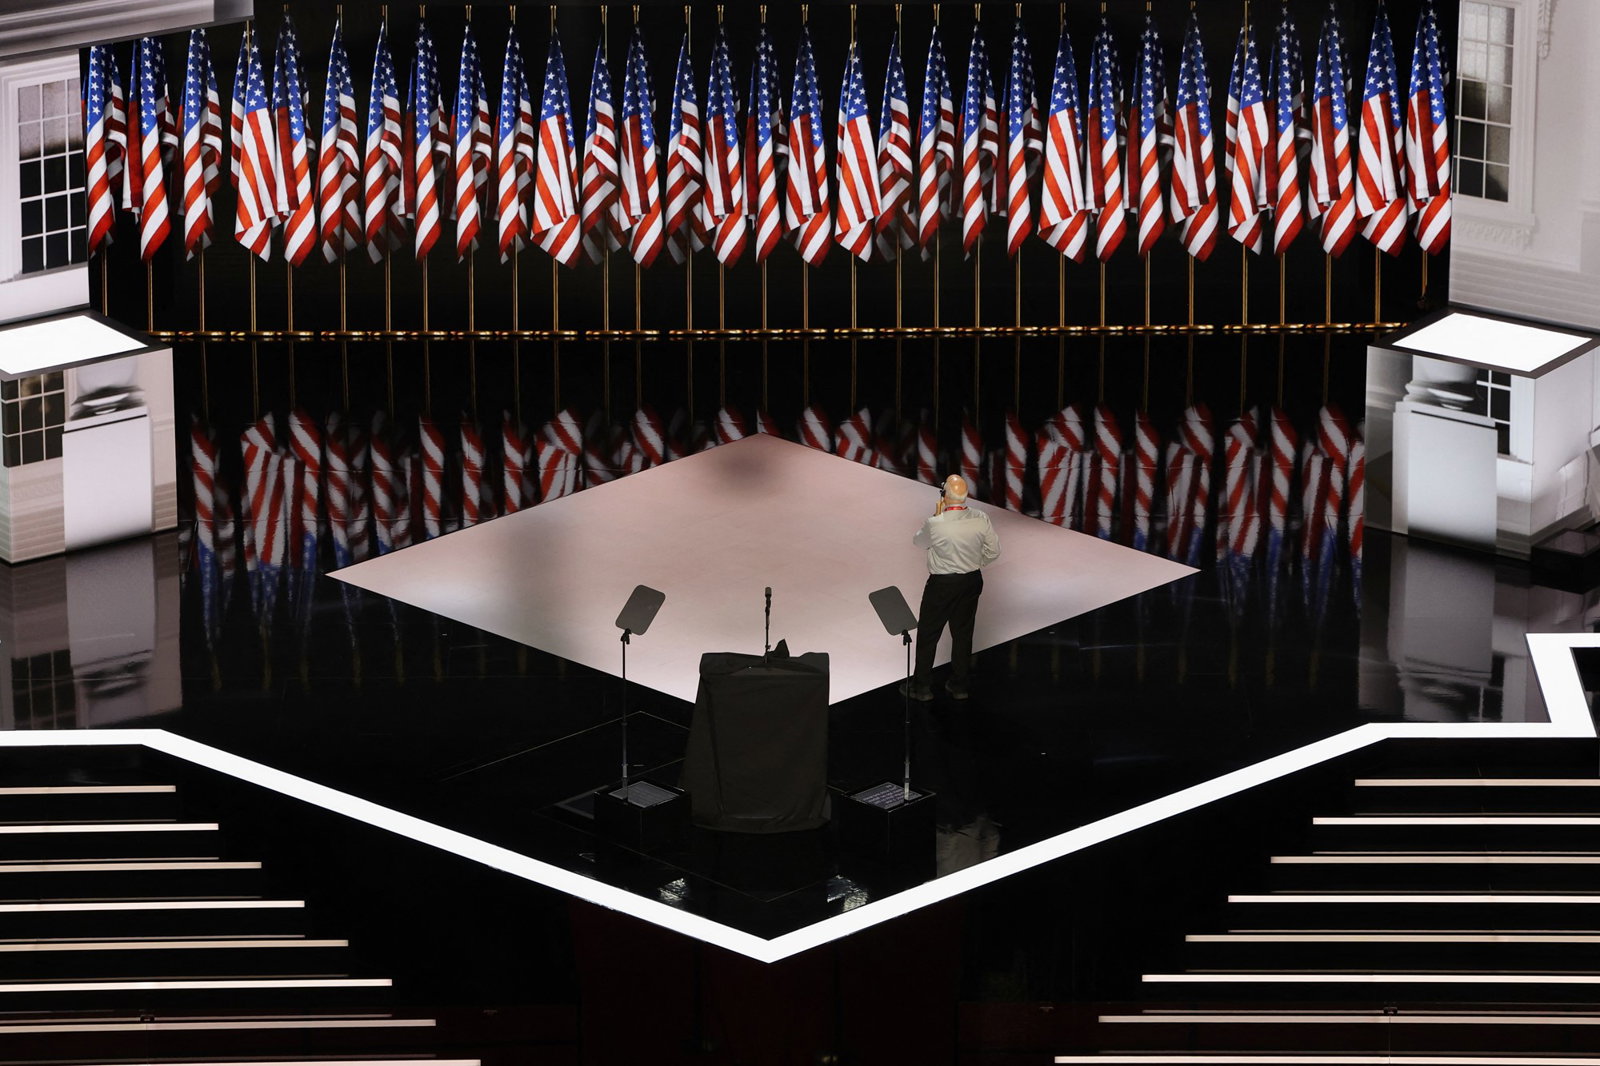 A man stands on an empty stage in front of a long row of American flags.